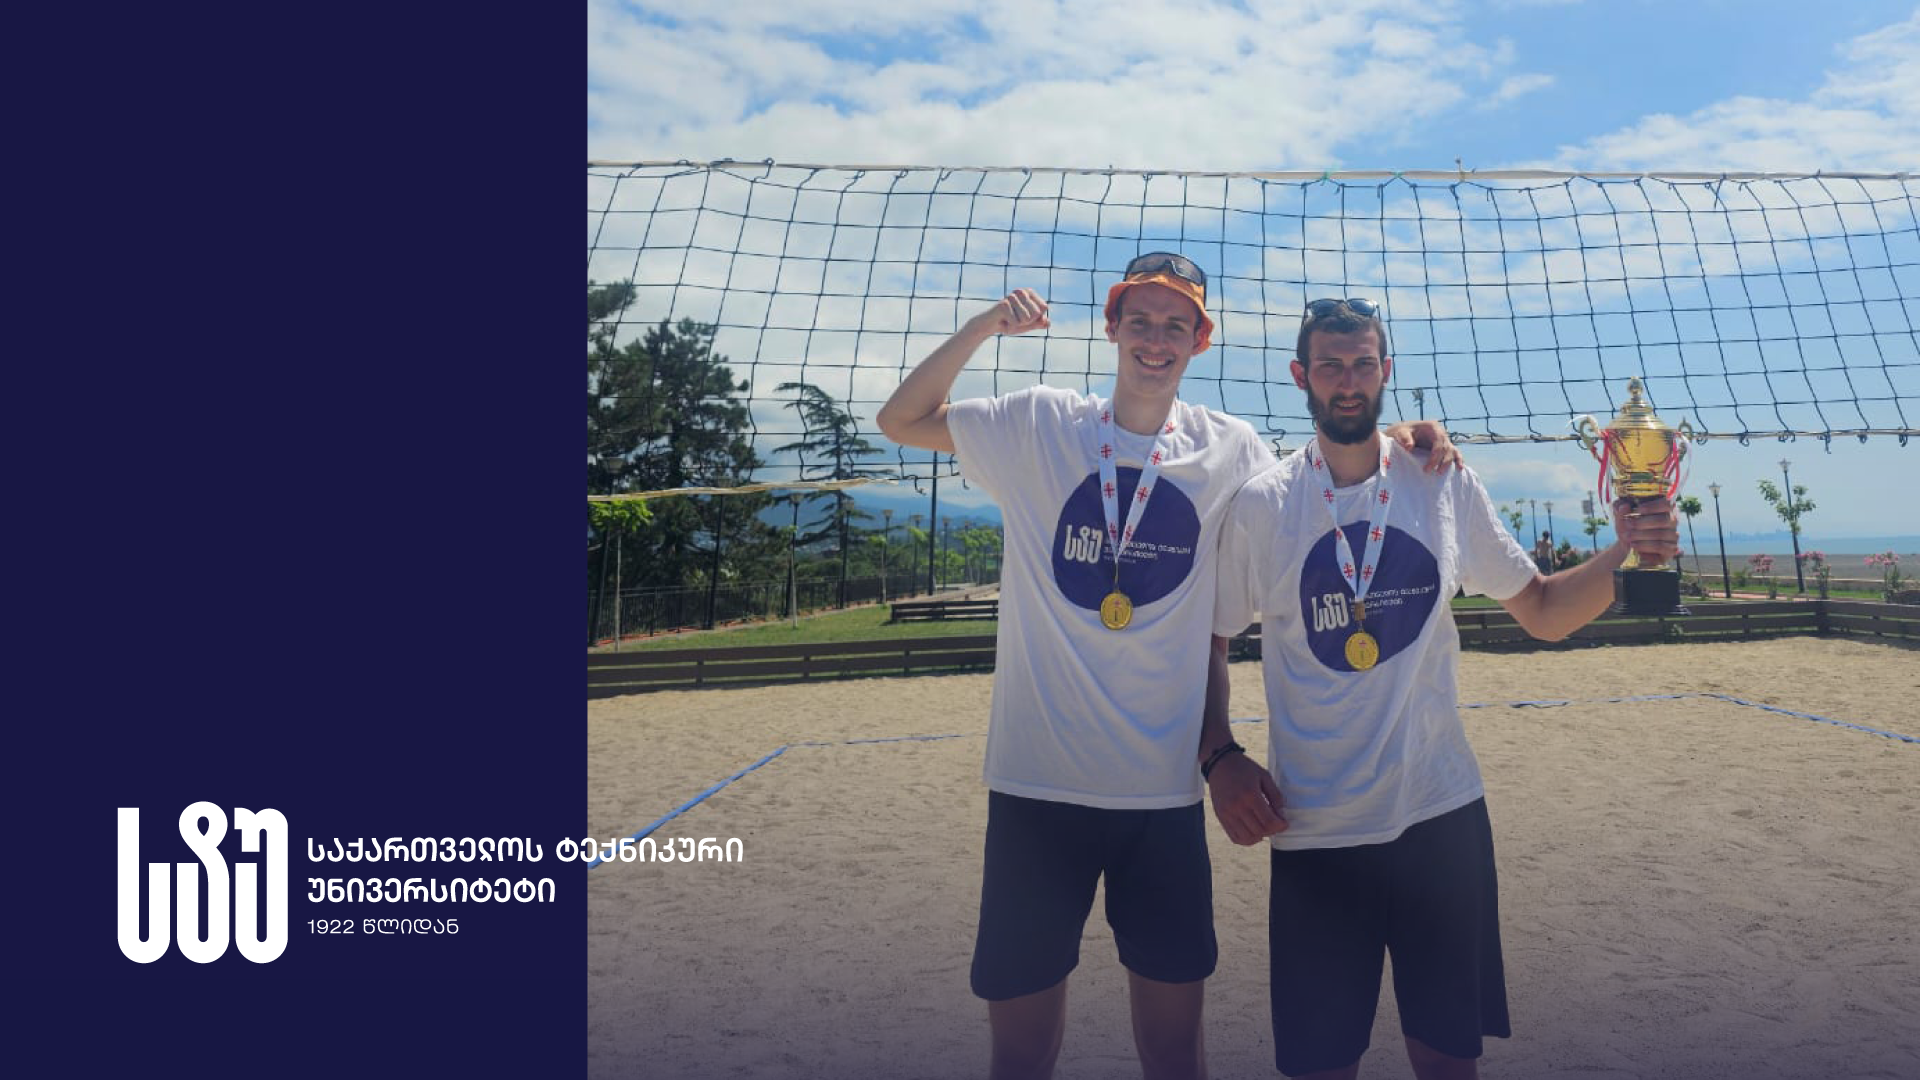 The GTU team is the winner of the Summer Universiada in sand volleyball